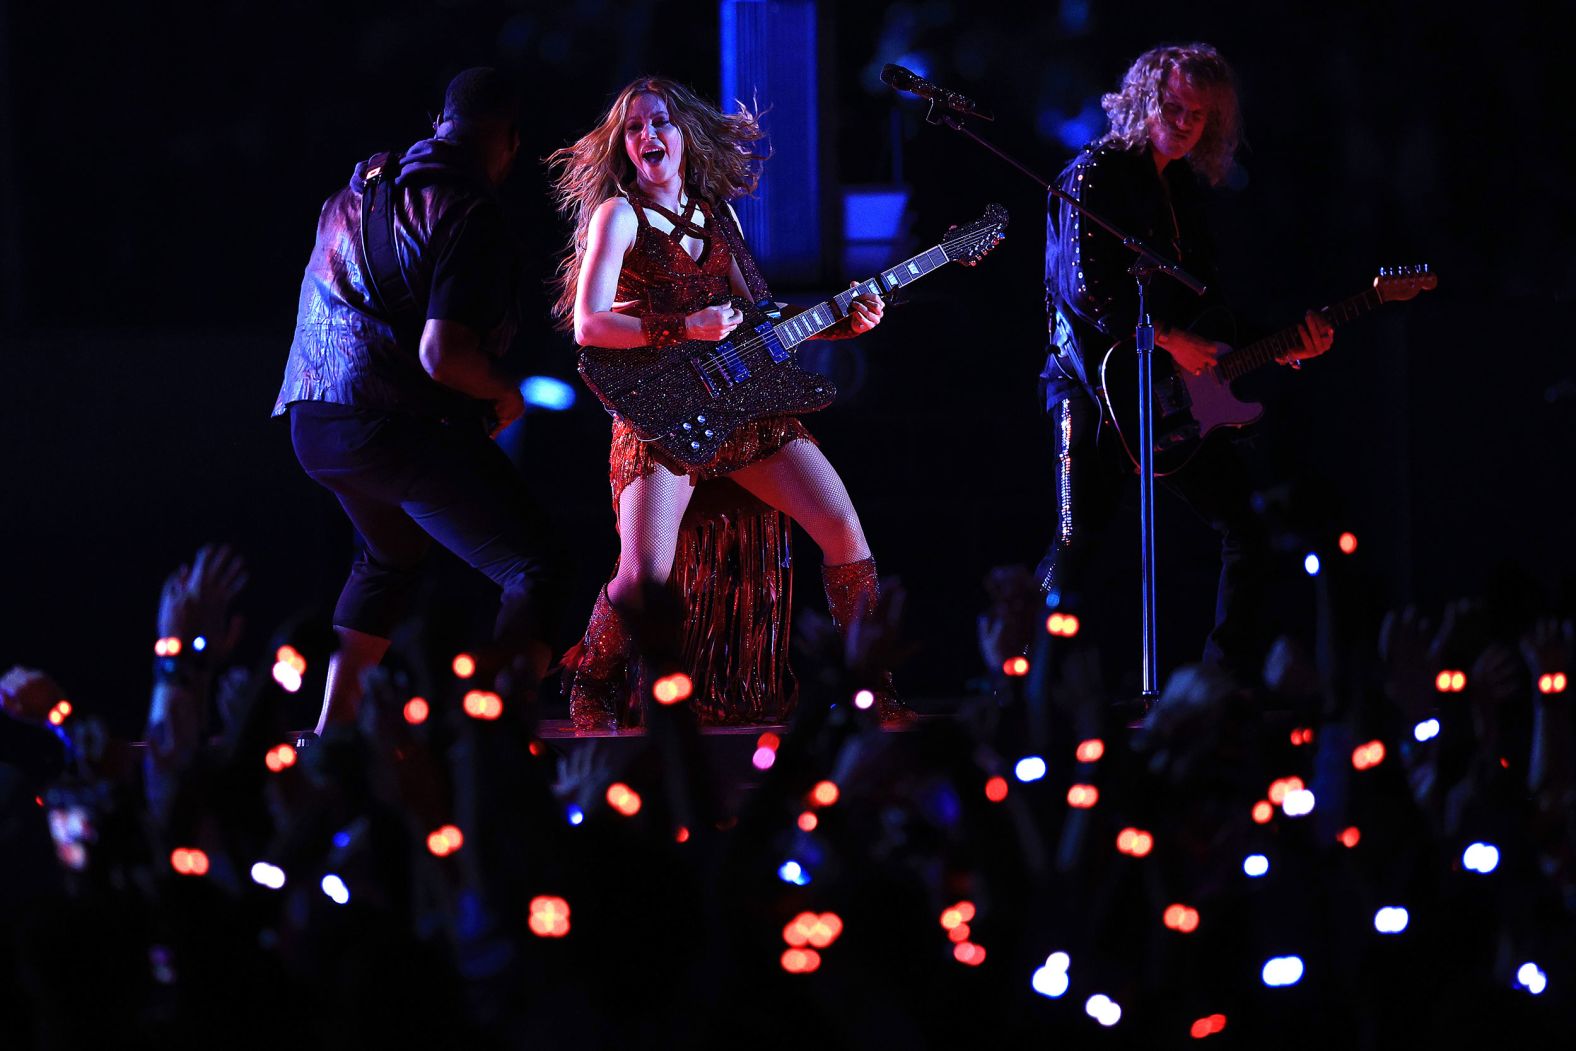 Shakira plays the guitar. Her songs included "She Wolf," "Hips Don't Lie" and "Whenever, Wherever."